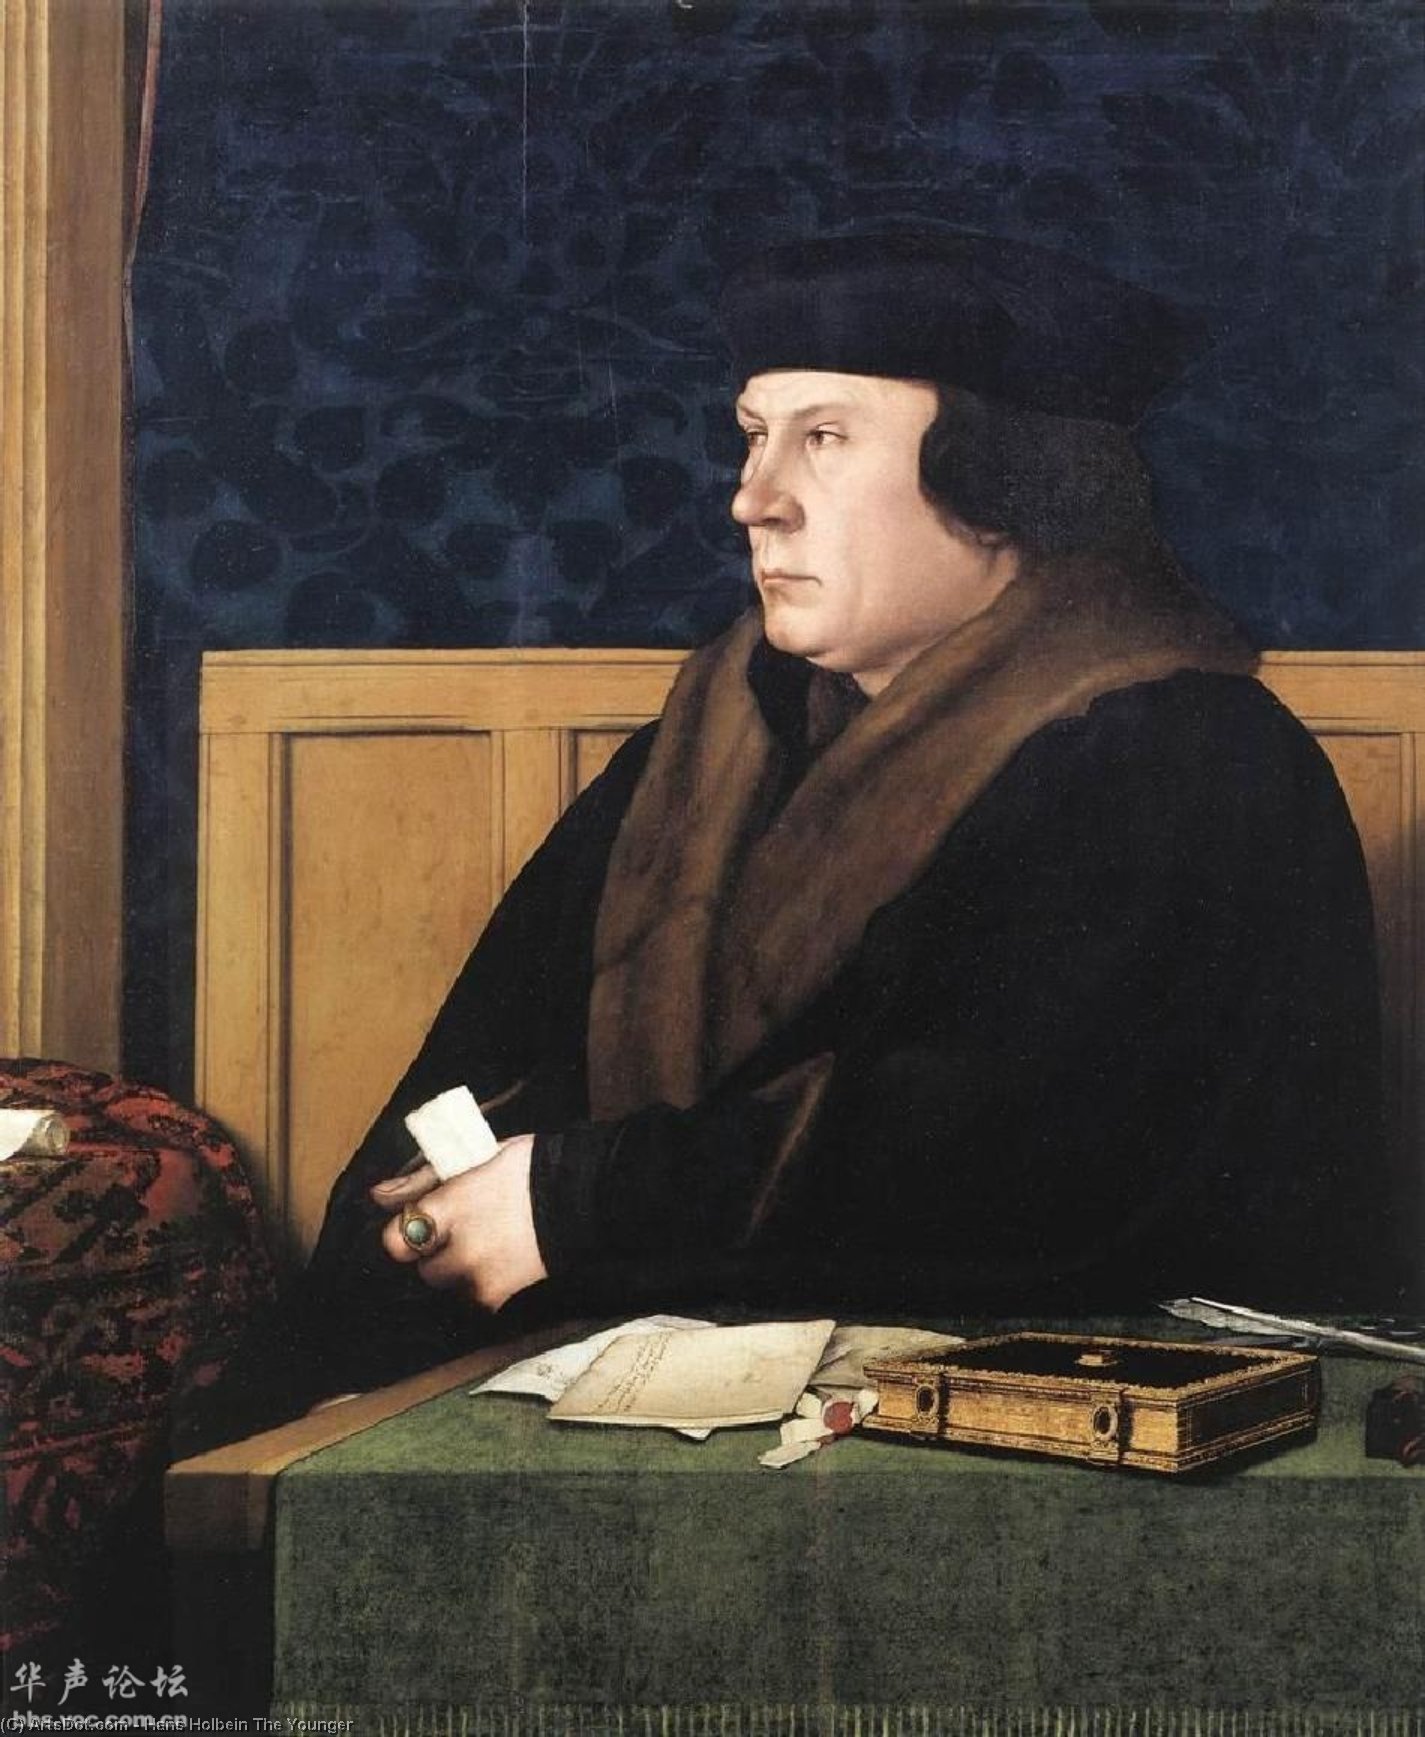 WikiOO.org - 백과 사전 - 회화, 삽화 Hans Holbein The Younger - Portrait of Thomas Cromwell